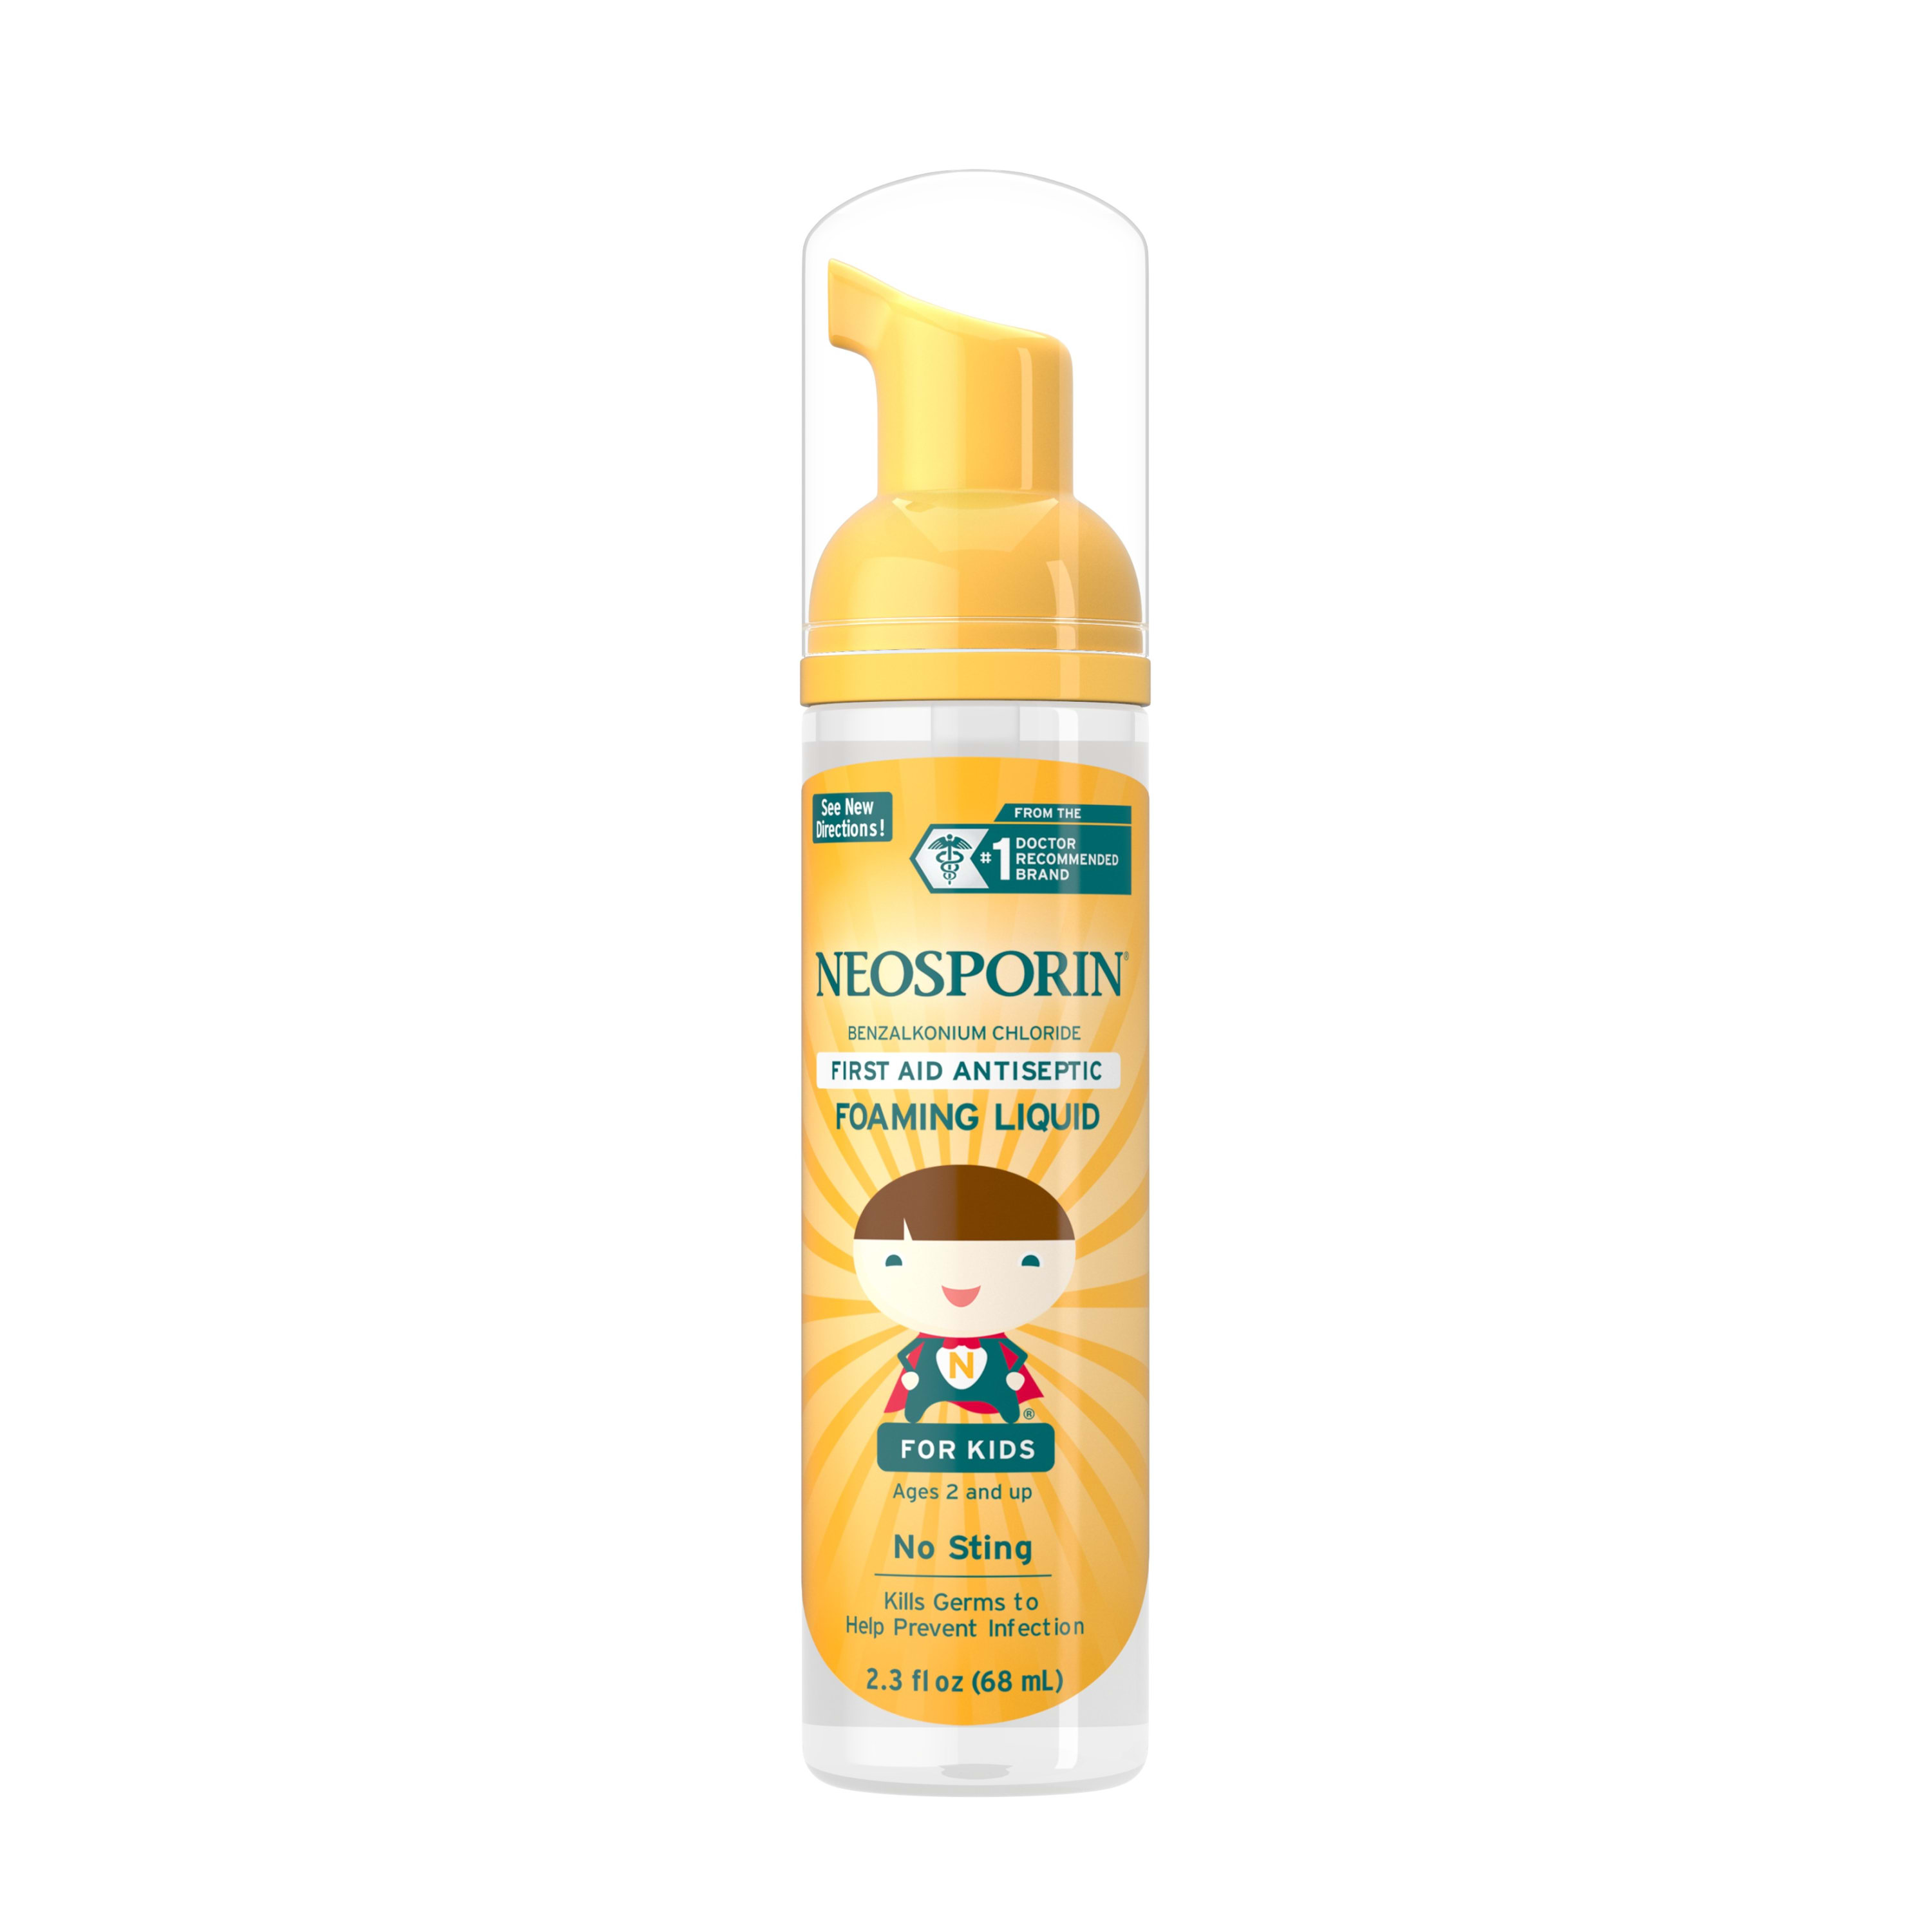 Neosporin Wound Cleanser For Kids To Help Kill Bacteria, 2.3 Oz - image 1 of 9